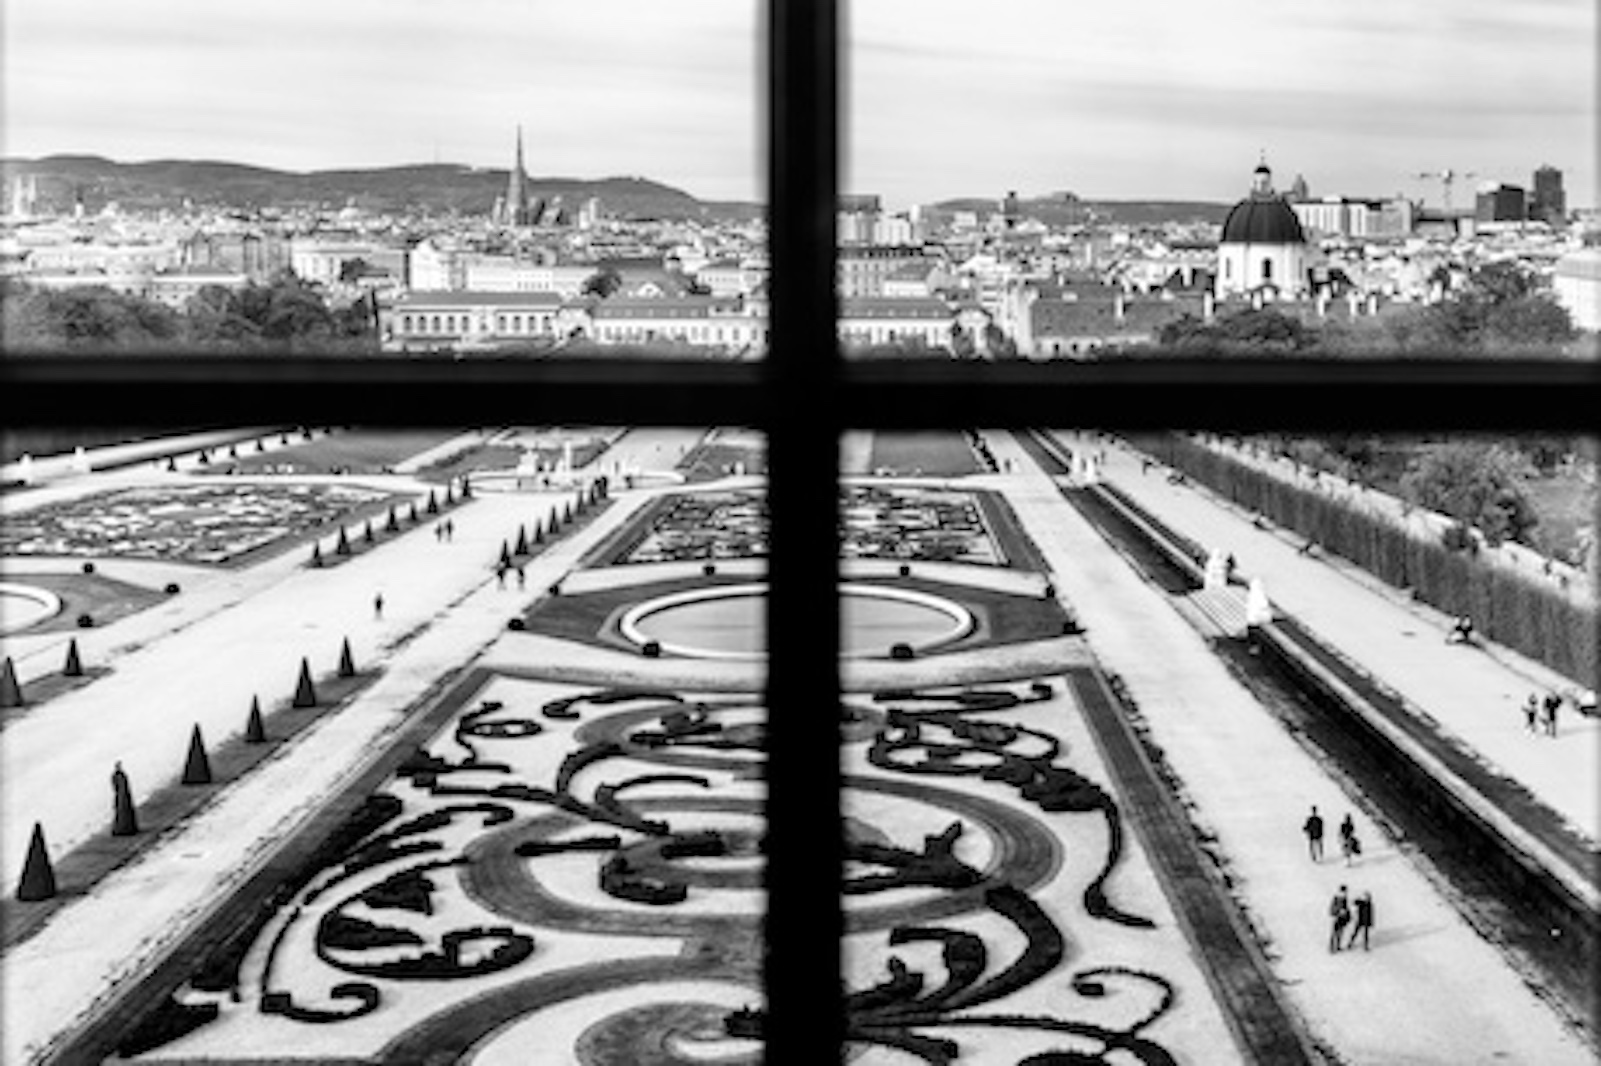 Looking through the window at the Belvedere